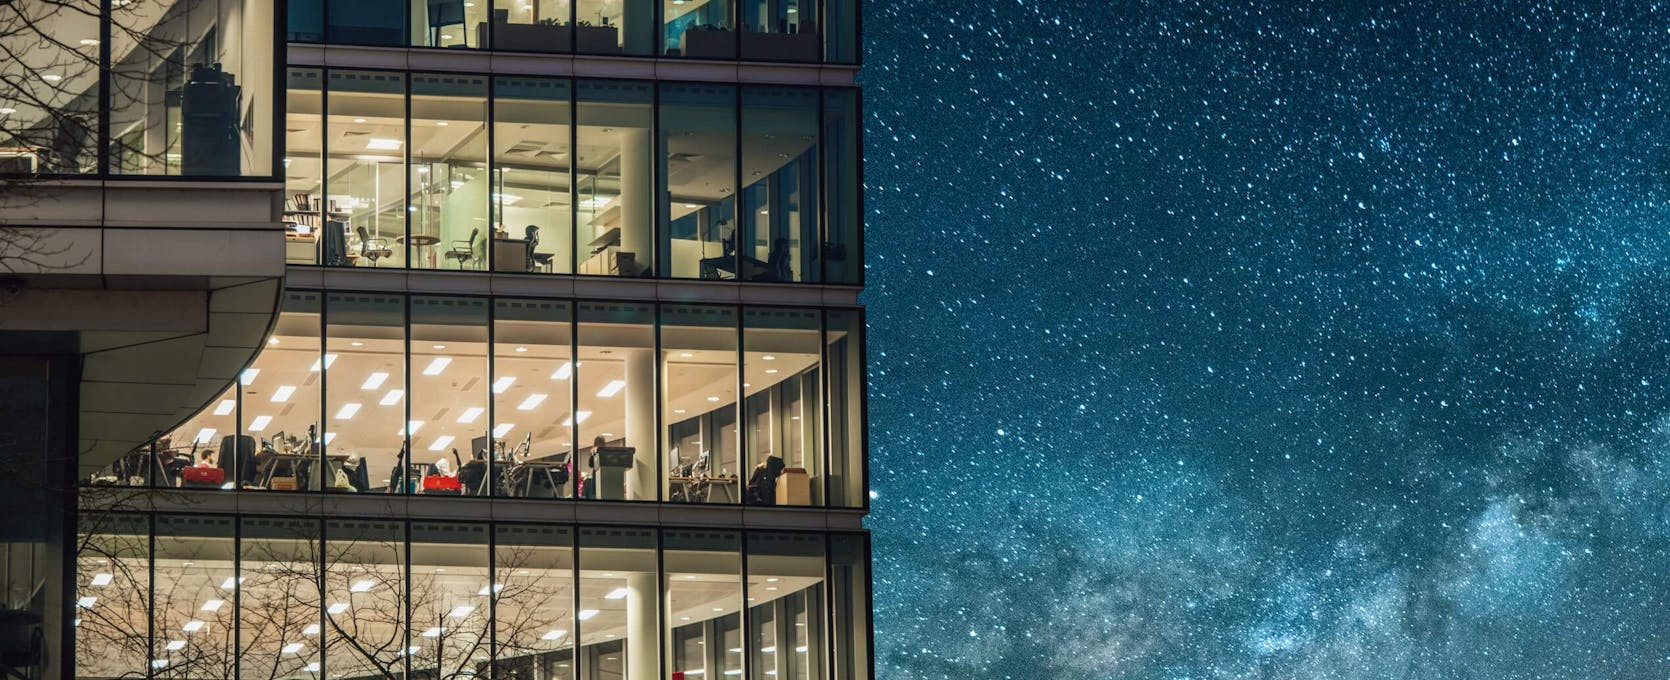 Office building and a star-filled sky